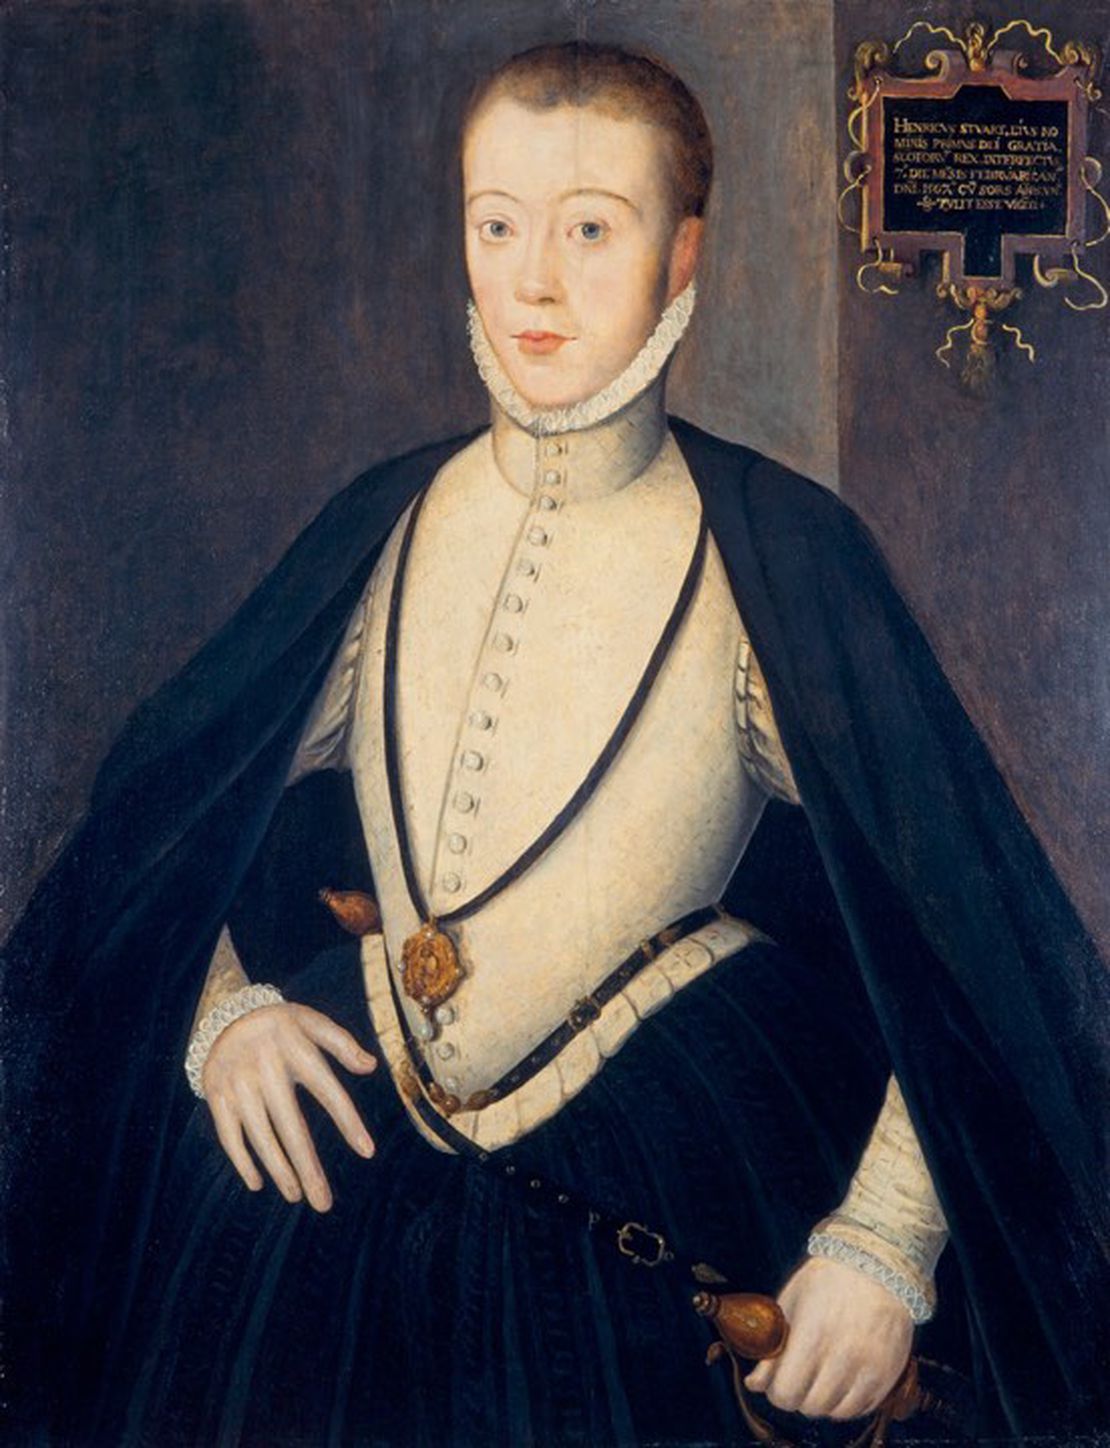 Lord Darnley, husband of Mary Queen of Scots, assassinated